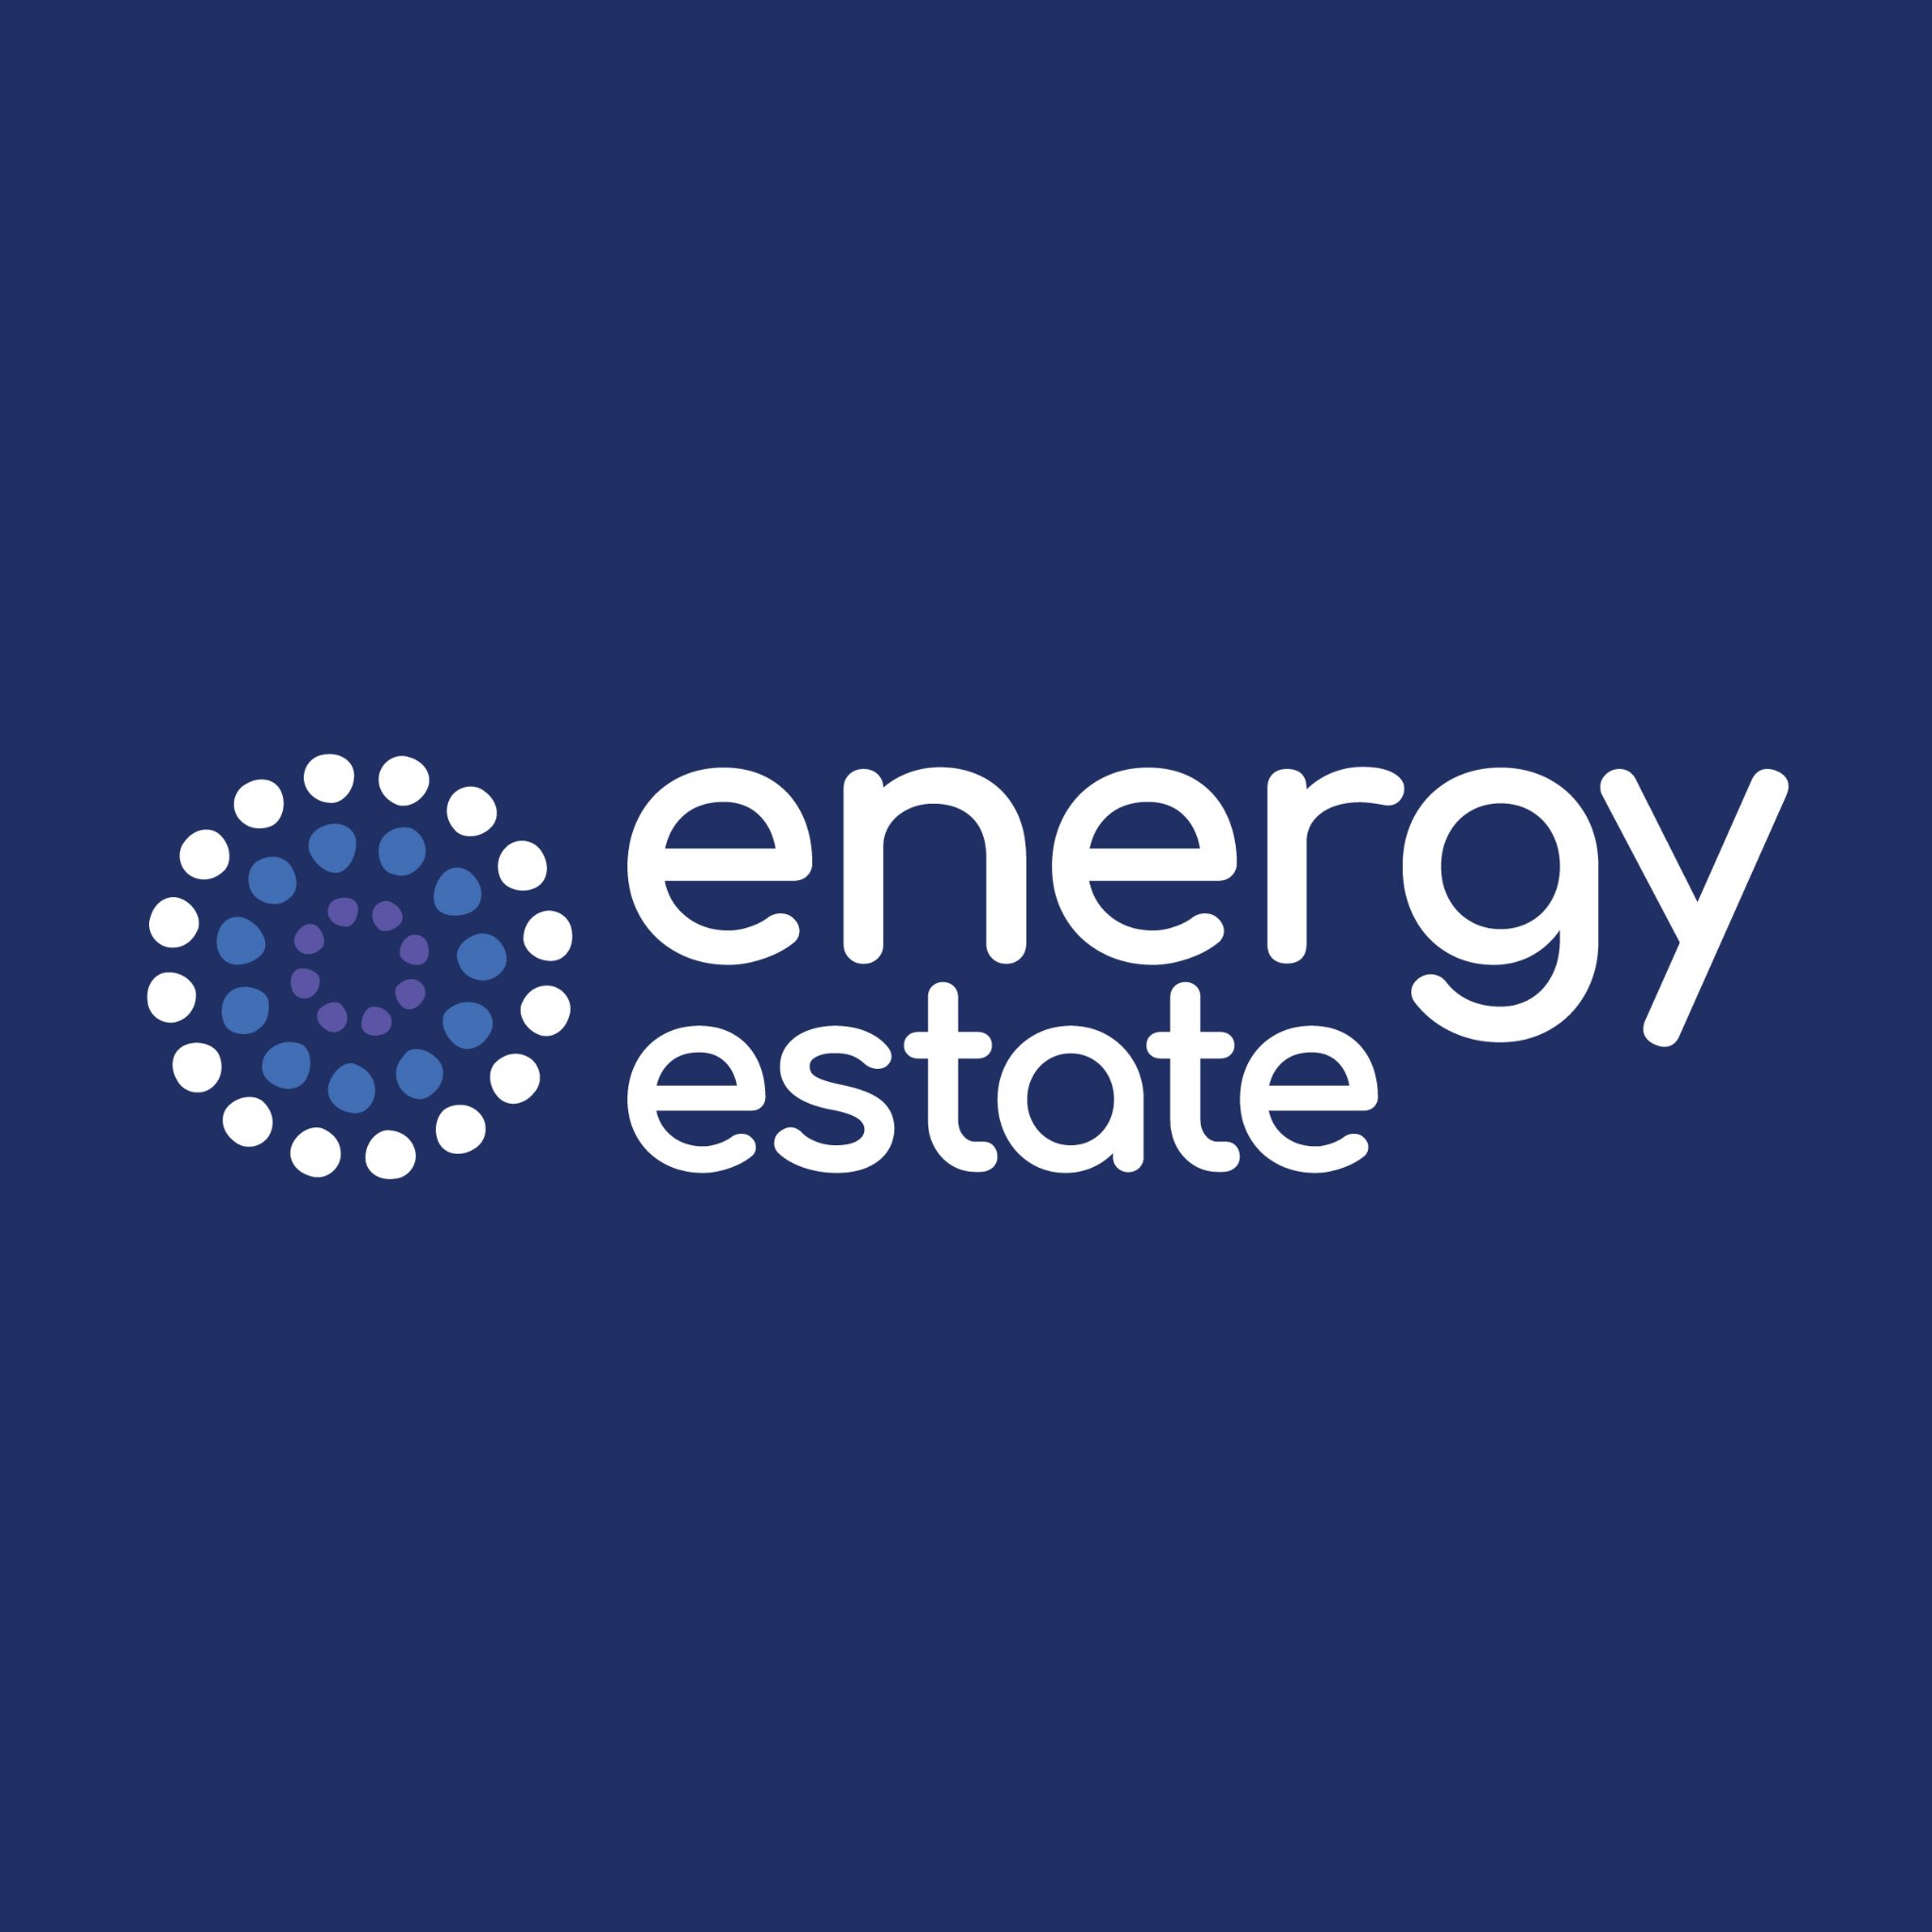 Energy Estate provides strategic consulting, transaction advisory and project development services to the global energy sector.